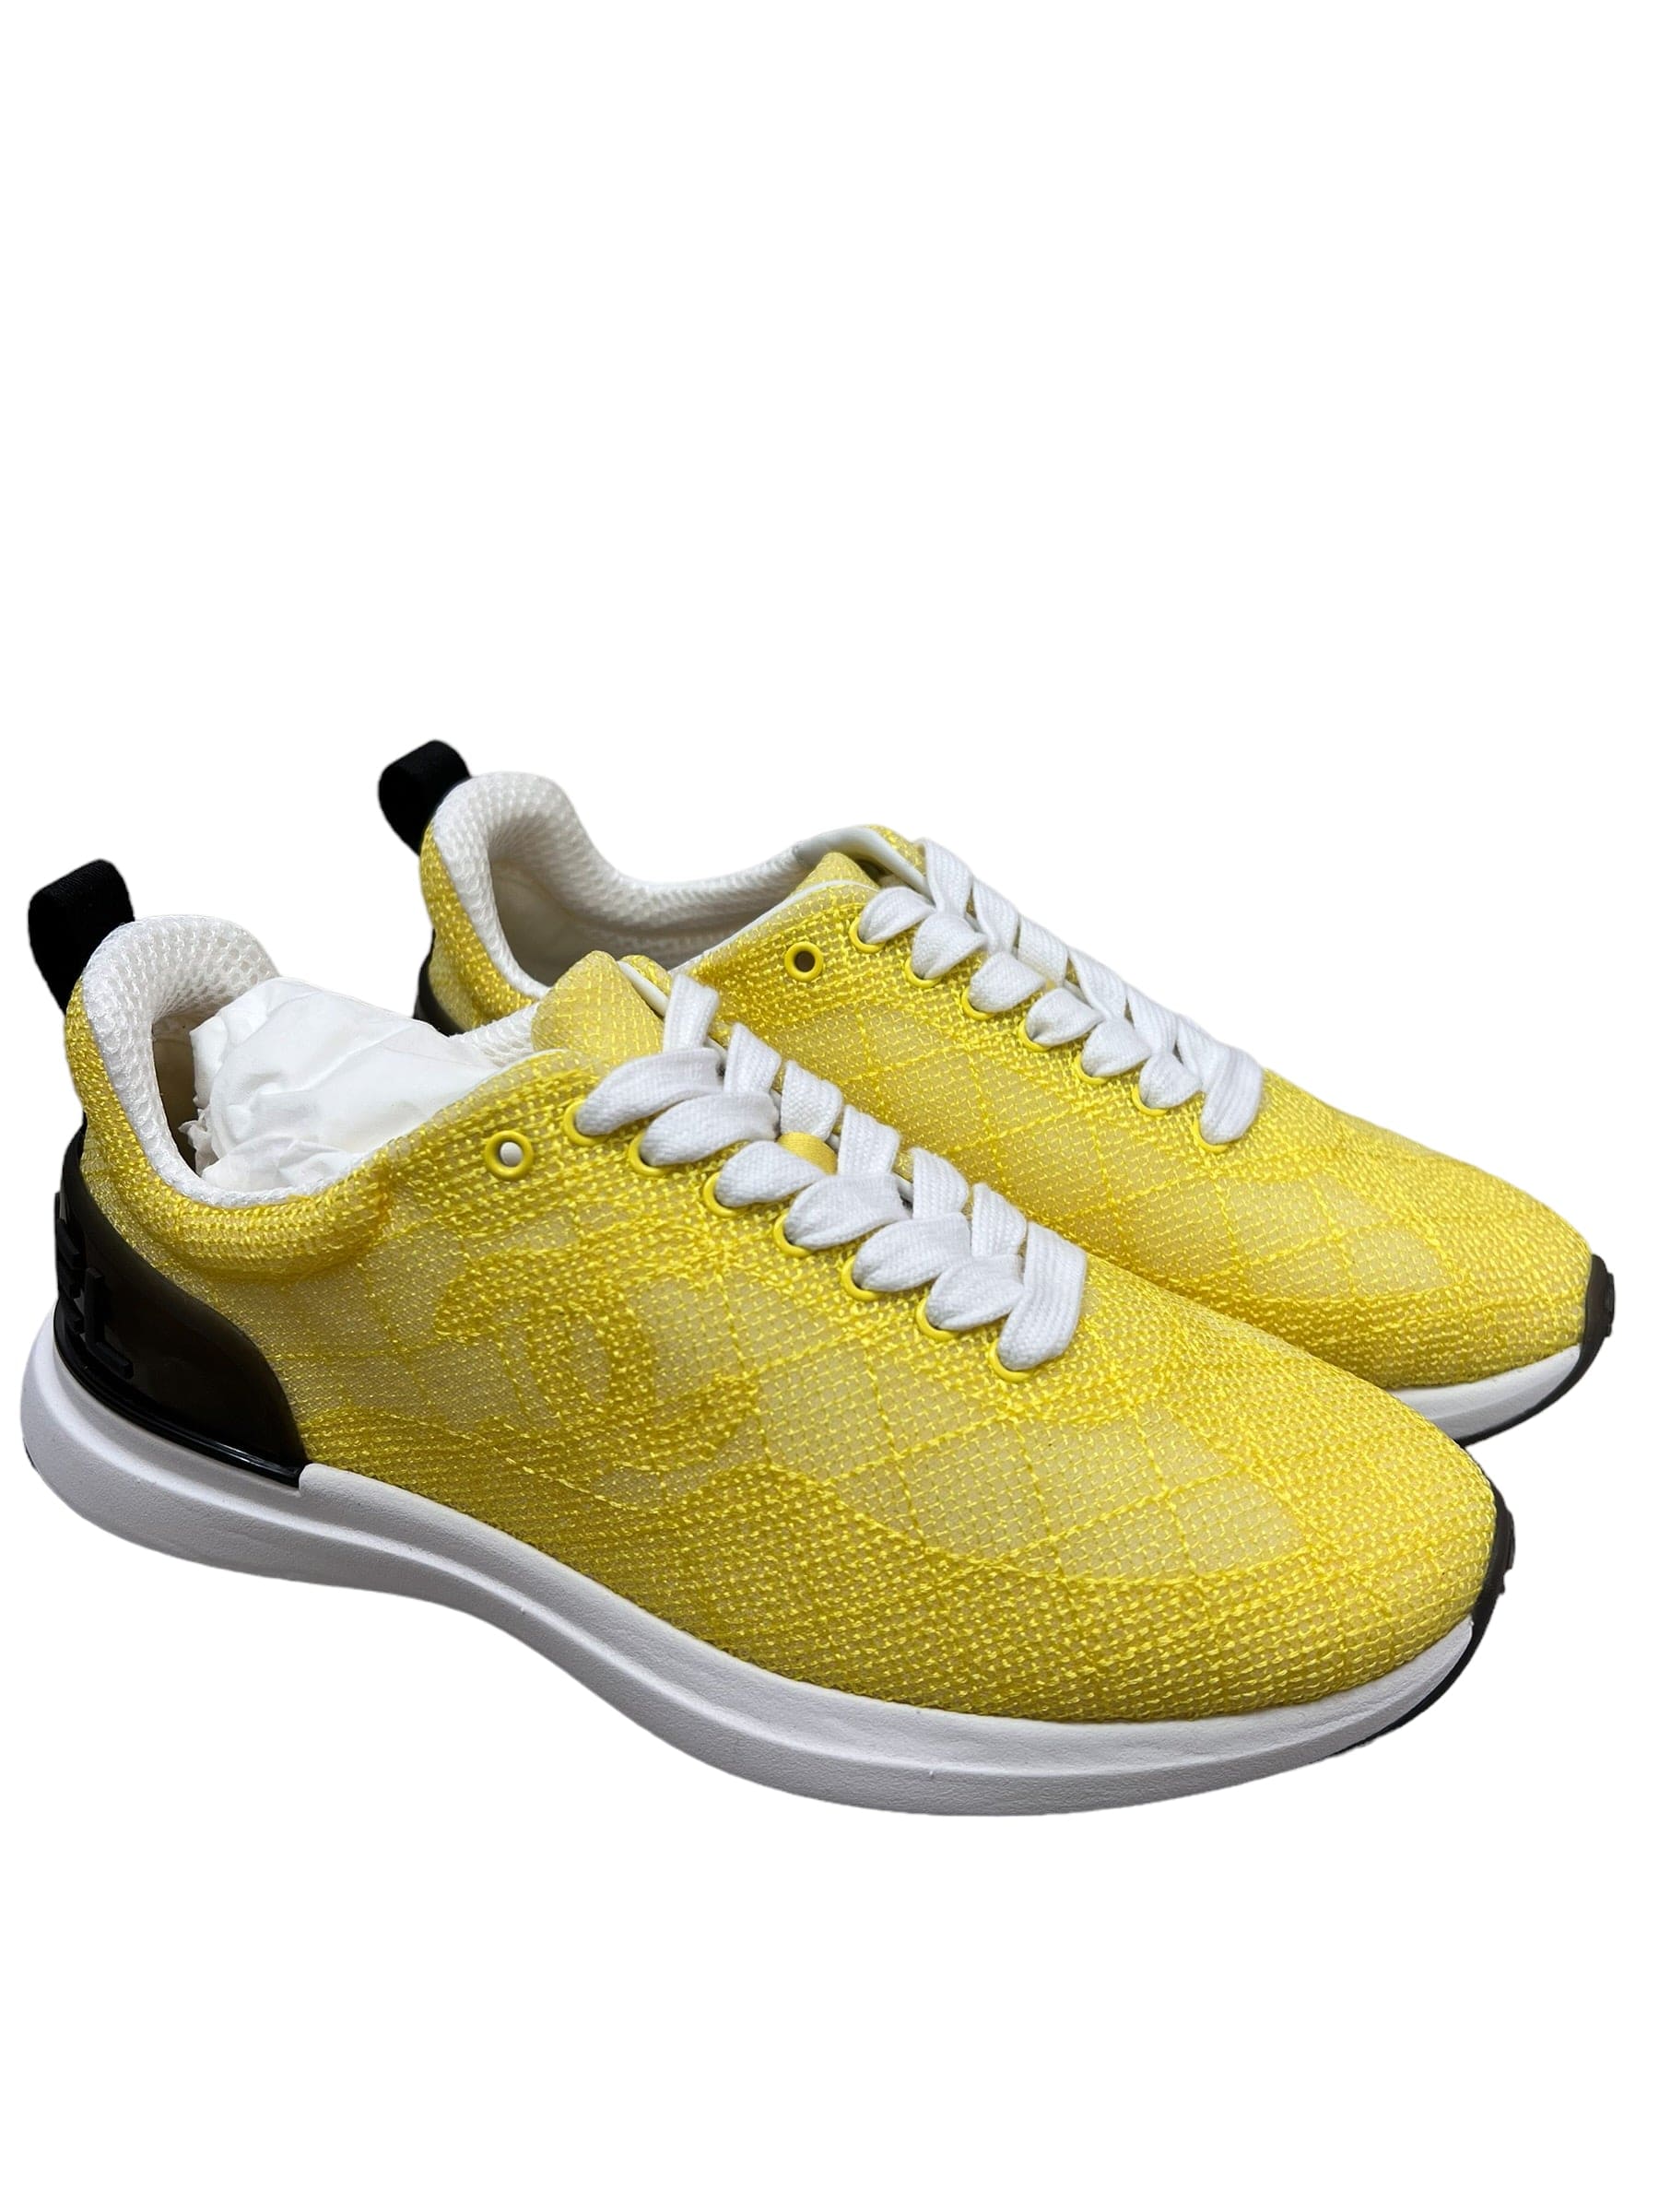 Chanel Chanel Trainers - Yellow Mesh Size 37 SKC1670